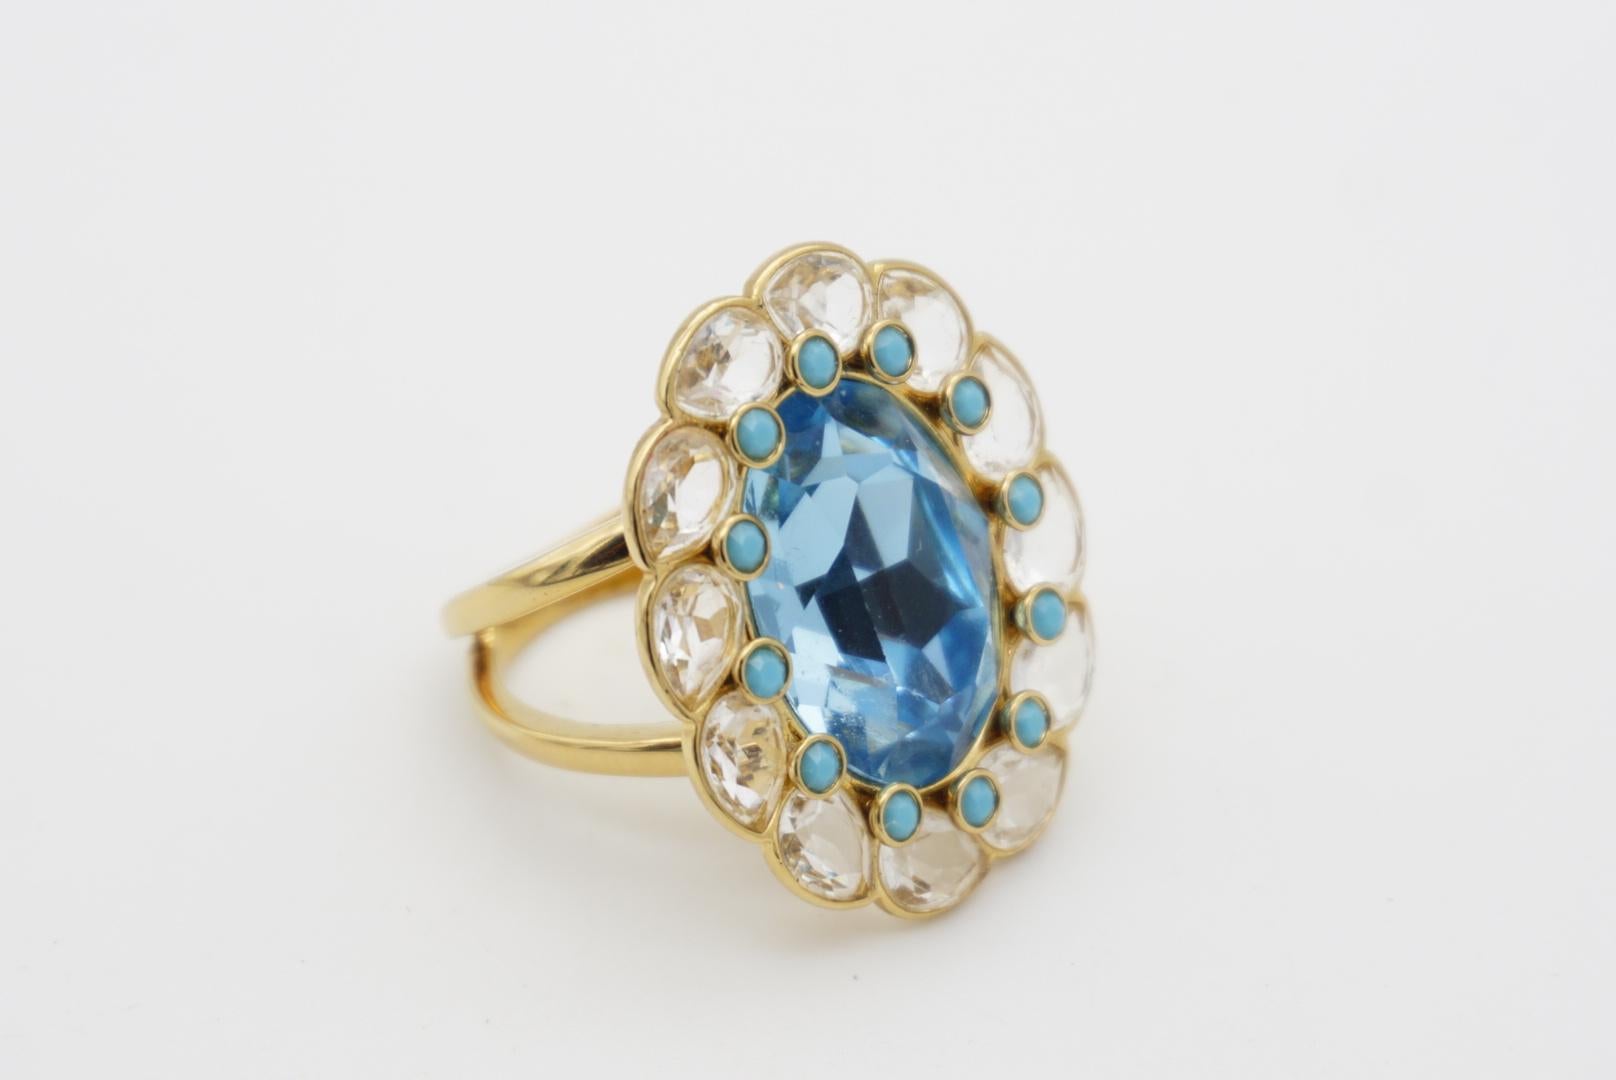 Swarovski Azore Blue Crystals Dots Clear Large Flower Cocktail Ring Size L 52 For Sale 3